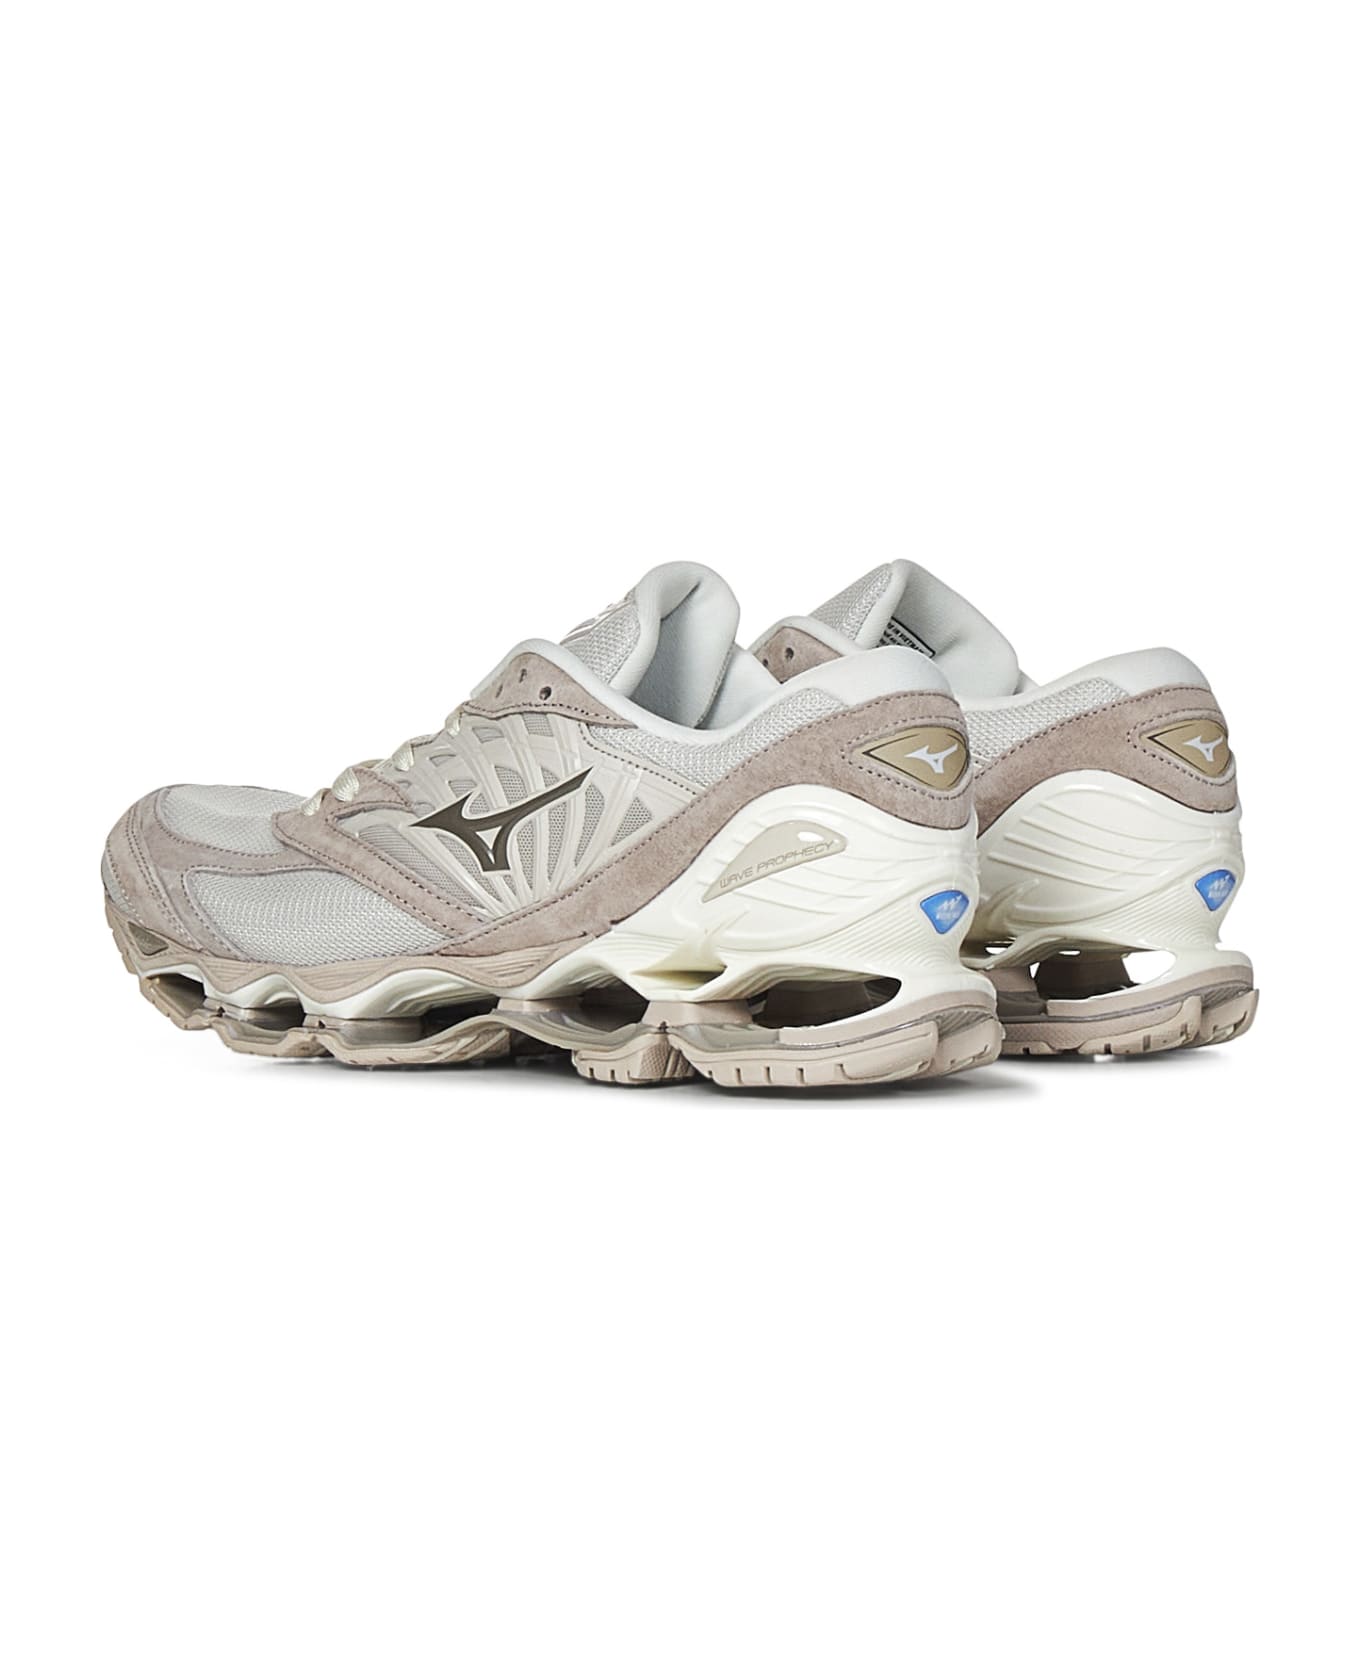 Mizuno Wave Prophecy Ls Sneakers - White スニーカー